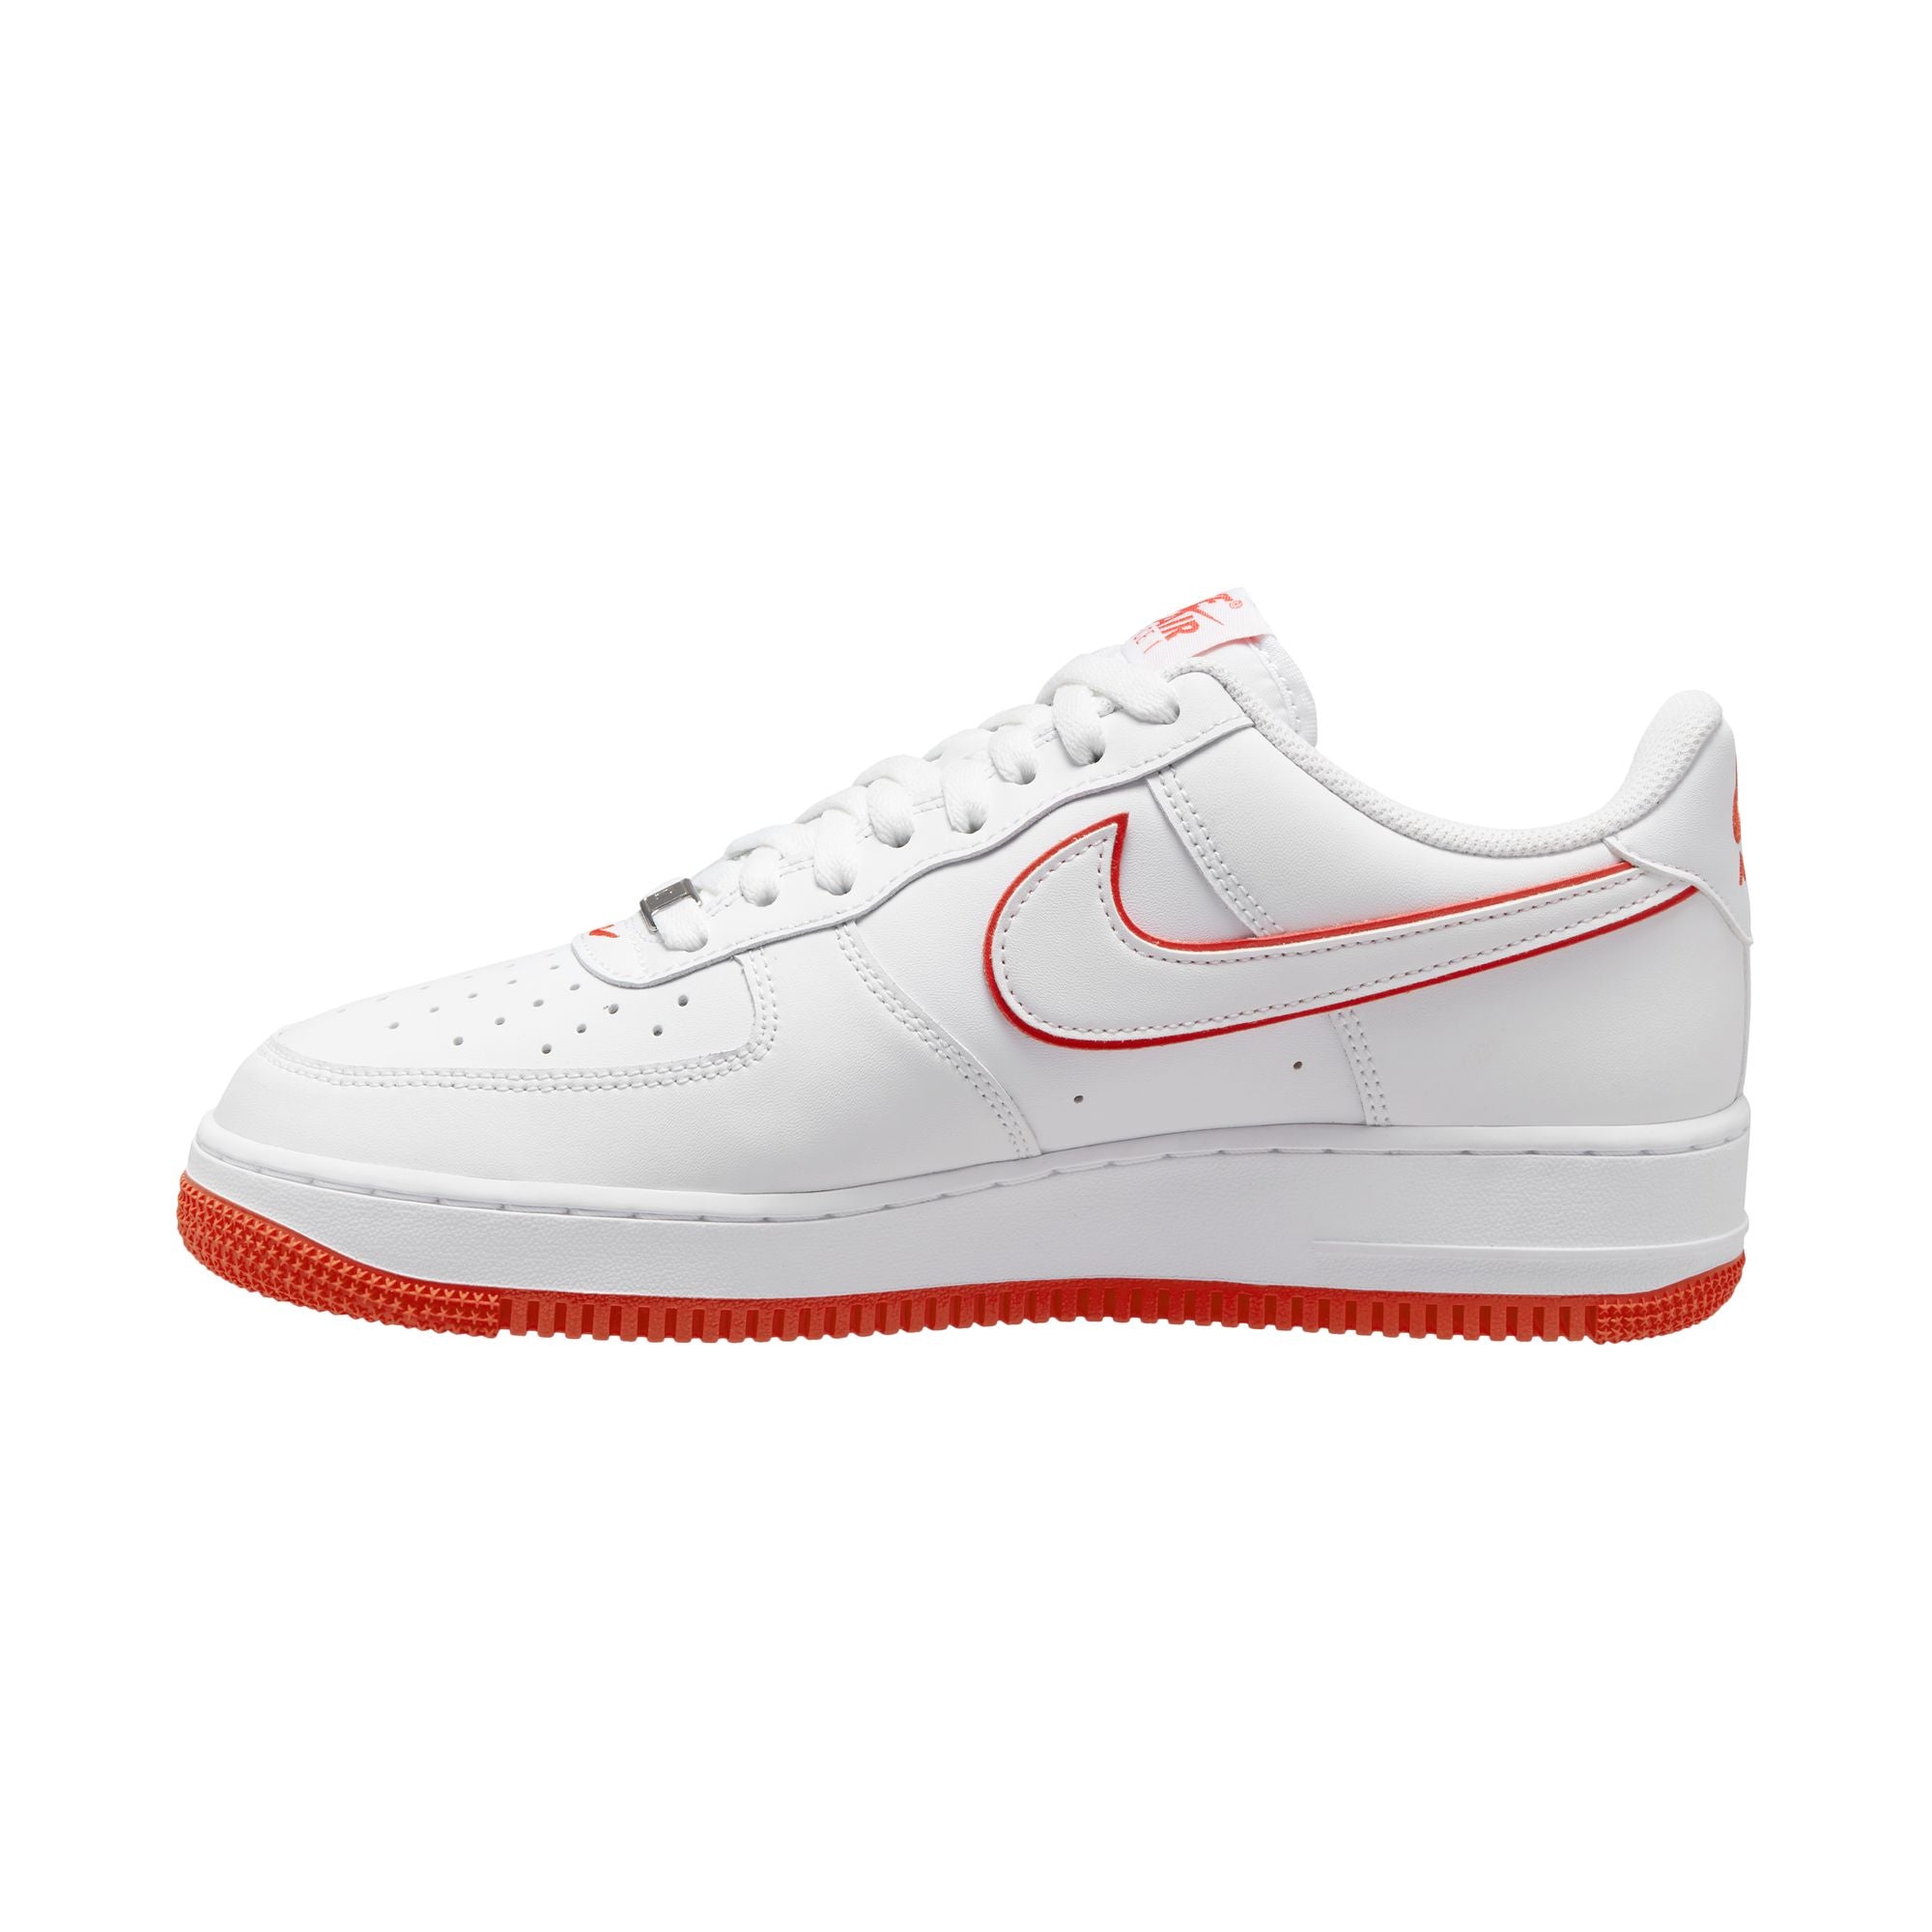 Nike Air Force 1 '07 Picante Red/Picante Red-White DV0788-600 Men's Size 13  Medium 